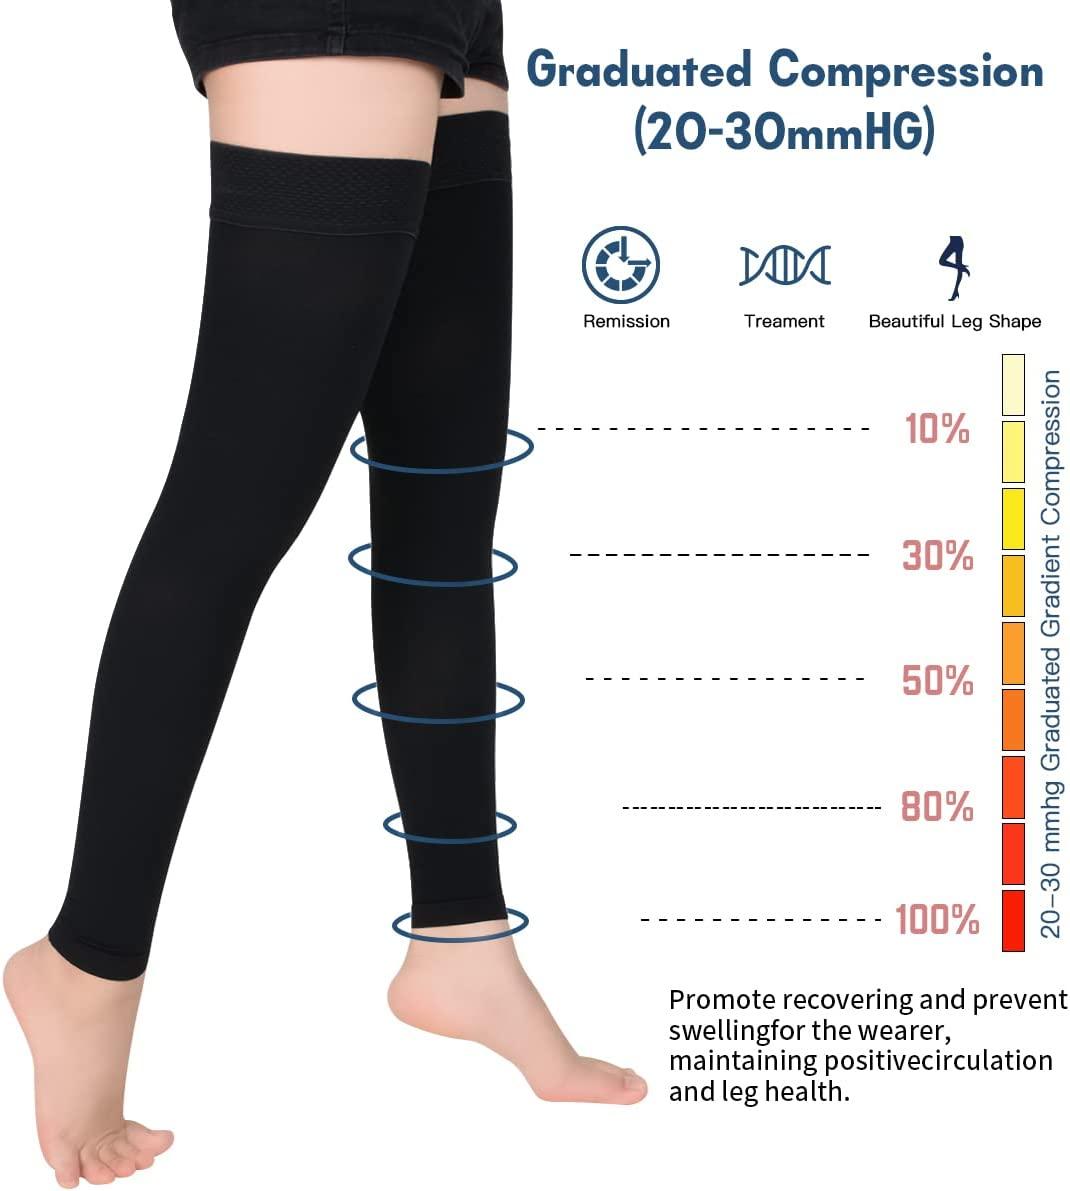 SKYFOXE Medical Thigh High Compression Stockings 20-30 mmHg for Women & Men  Firm Suppport Circulation with Silicone Dot 2-Footless Black X-Large